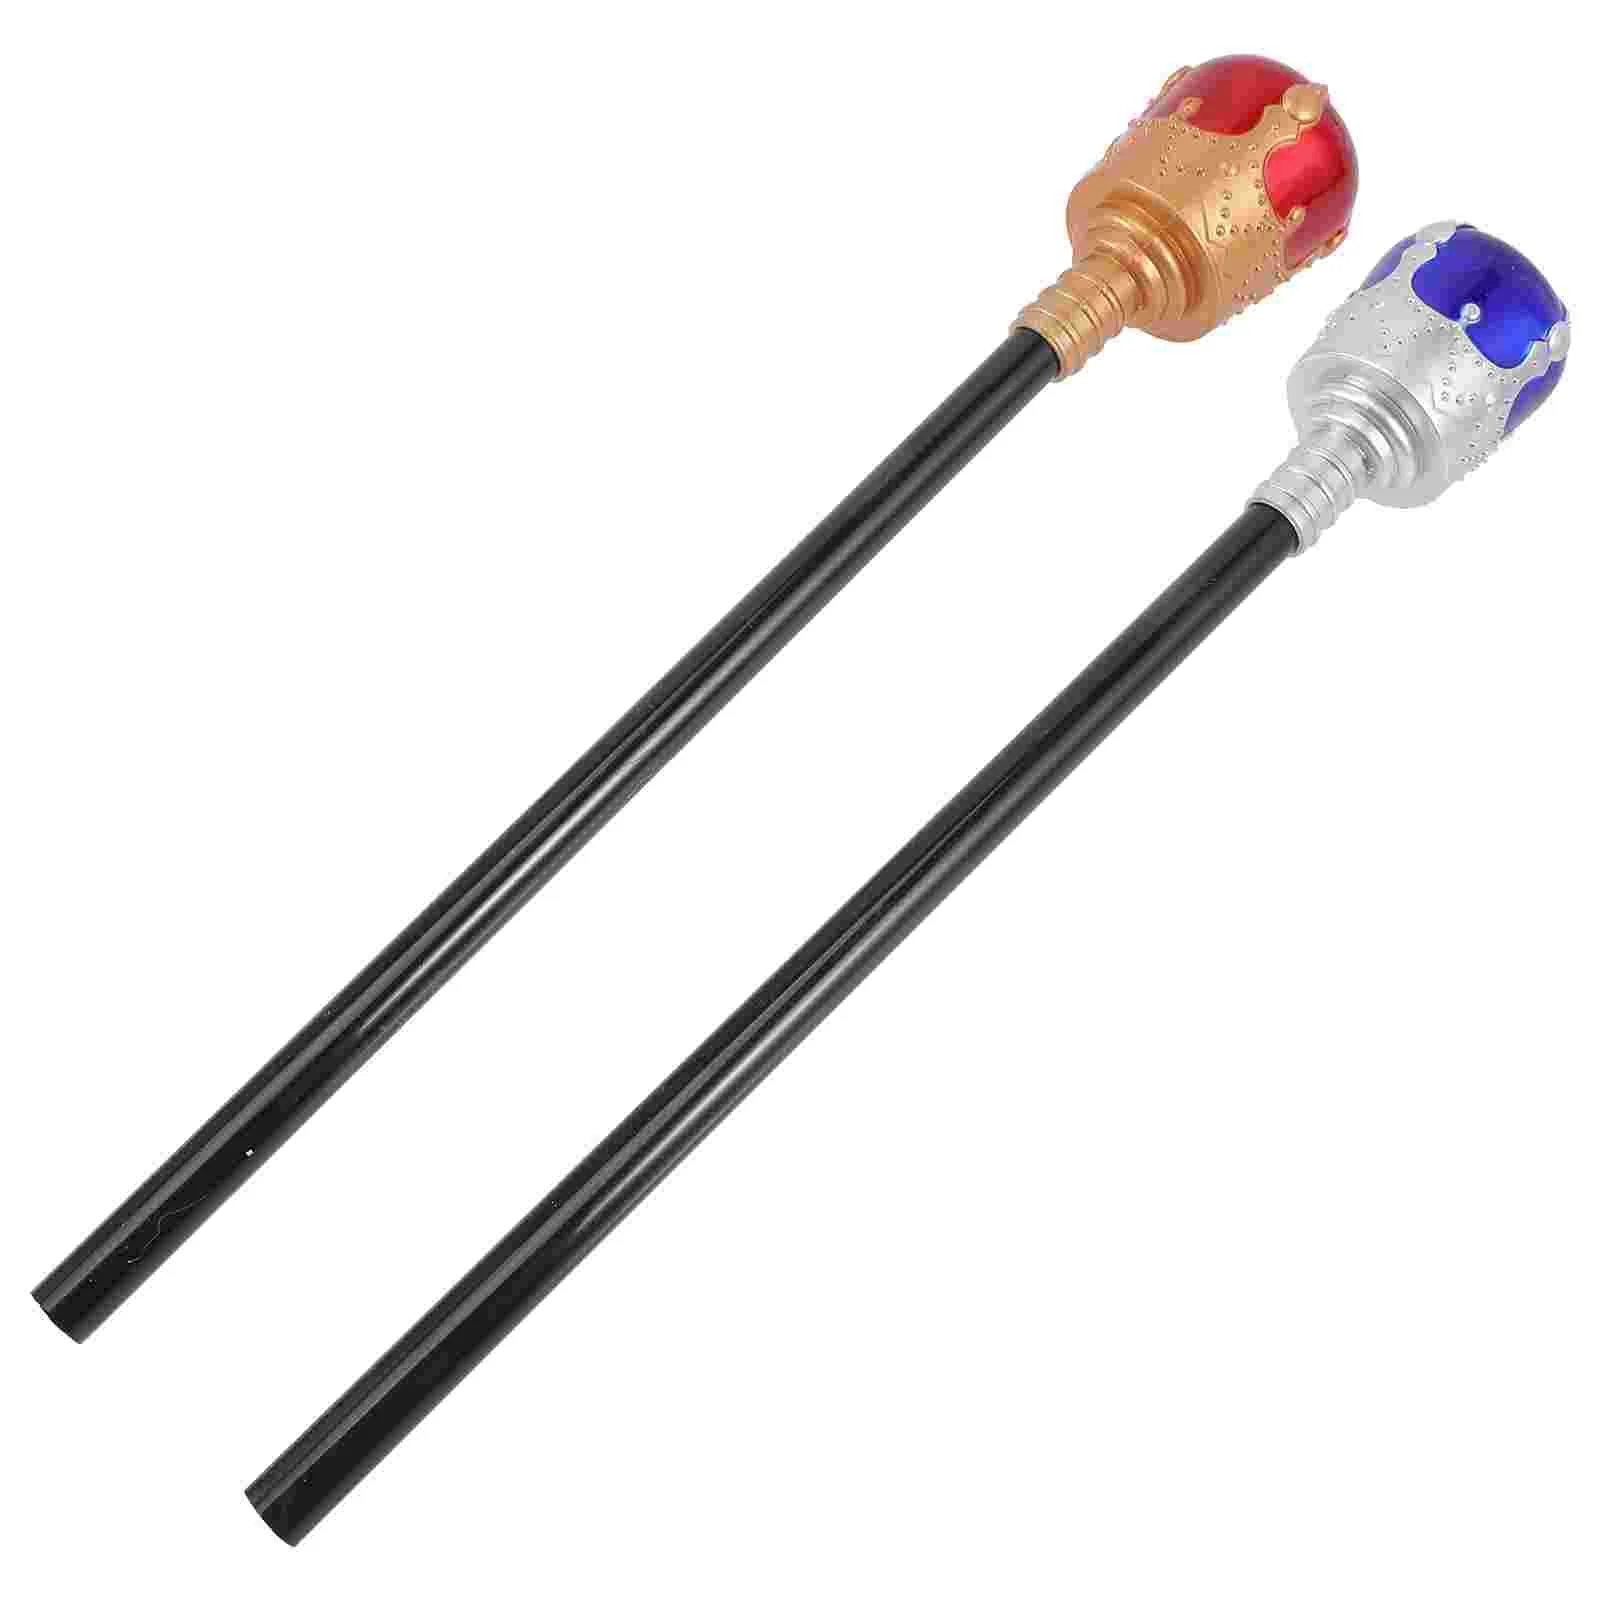 

2 Pcs Cane Props Performance Scepter Tool Princess Toy Party Supply Plastic Kids Child Makeup